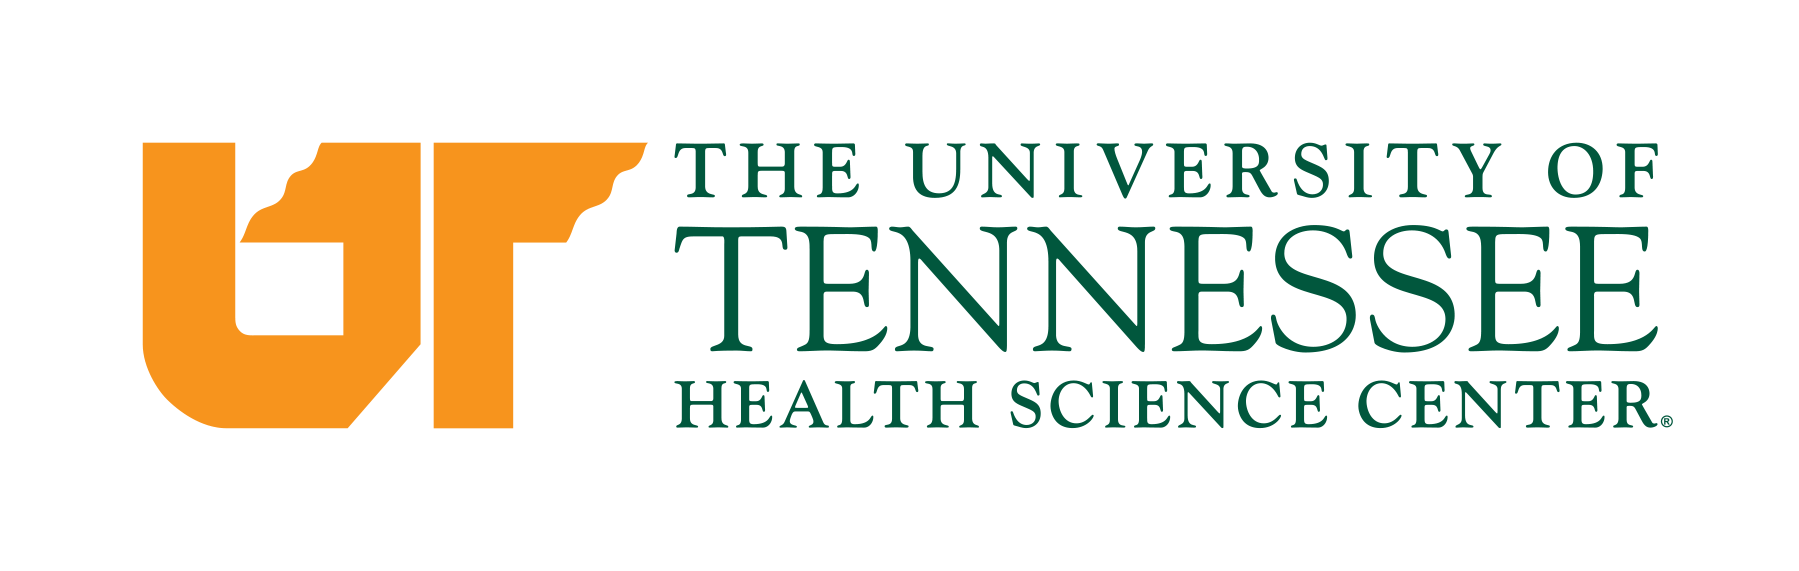 Course Director of Principles of Clinical Medicine Position in Tennessee